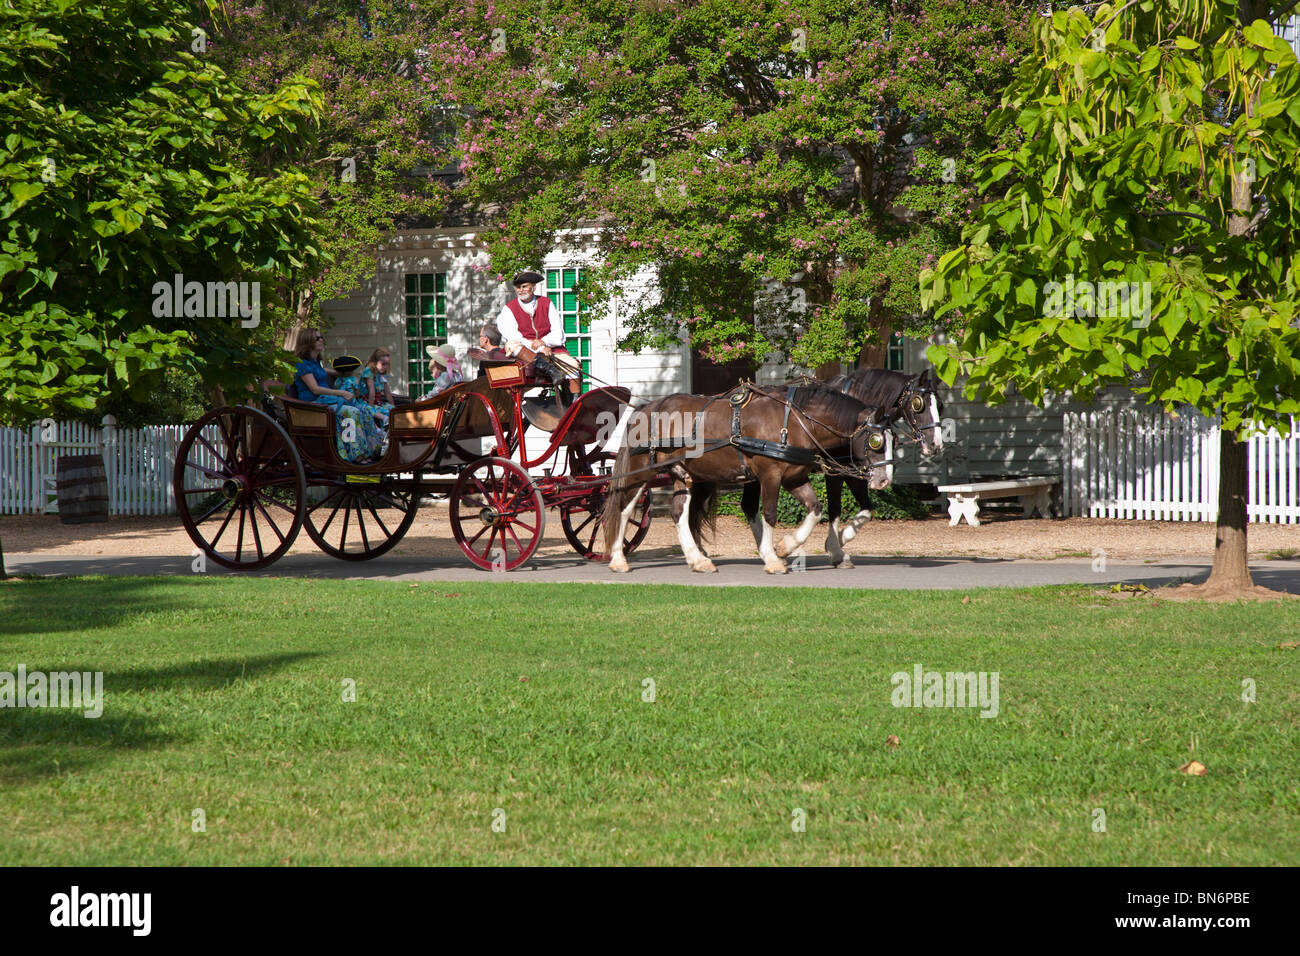 Family taking horse drawn carriage ride at Colonial Williamsburg living history museum in Williamsburg Virginia. Stock Photo